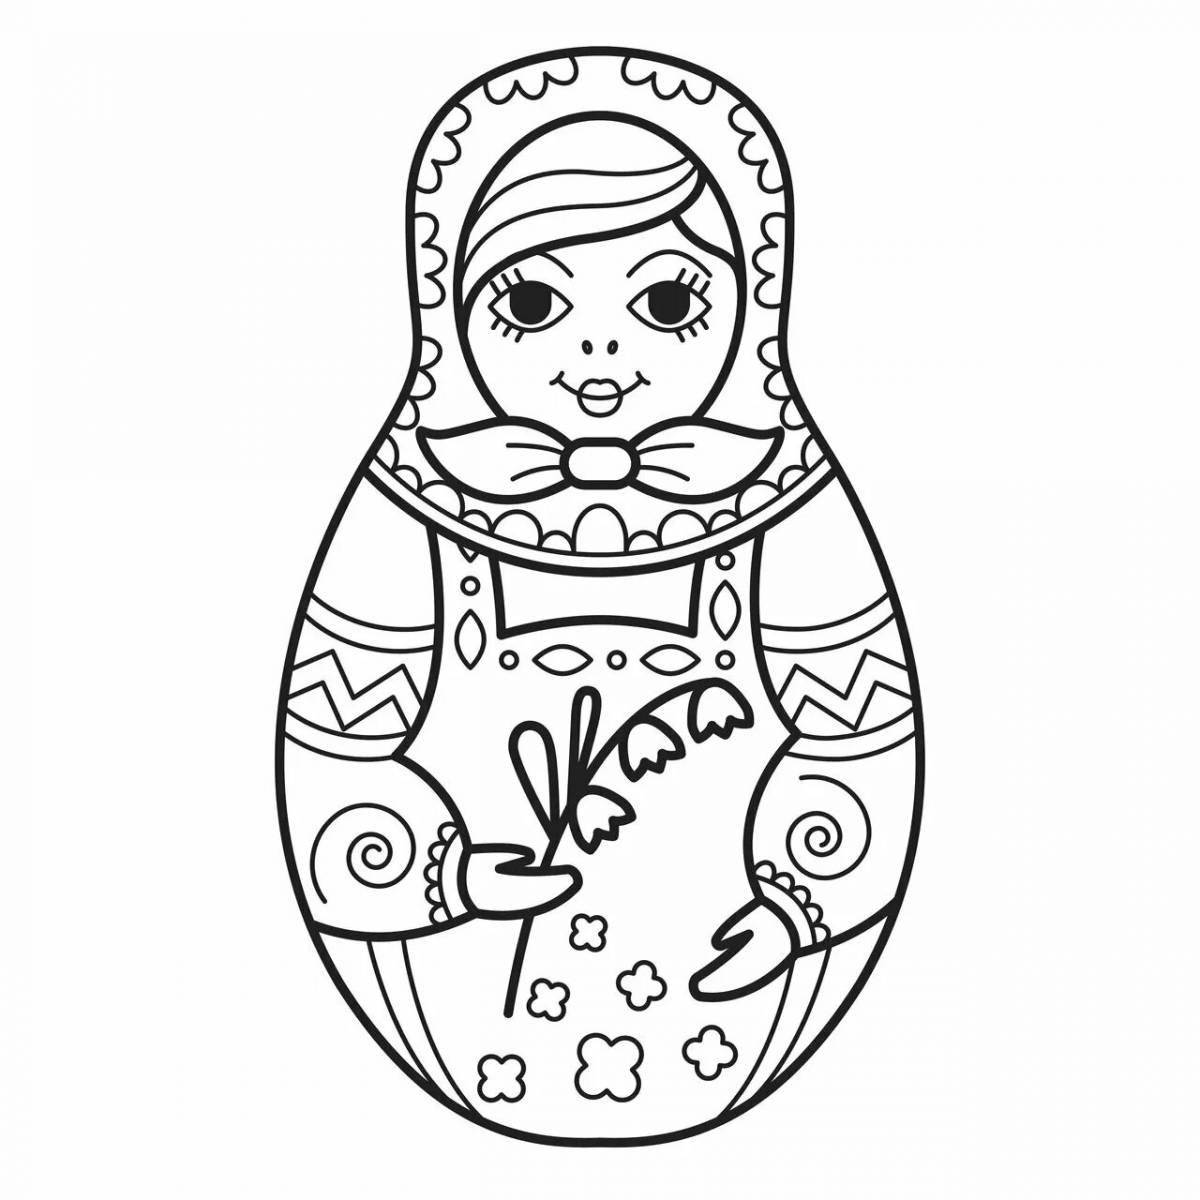 Magic Russian matryoshka coloring book for children 6-7 years old